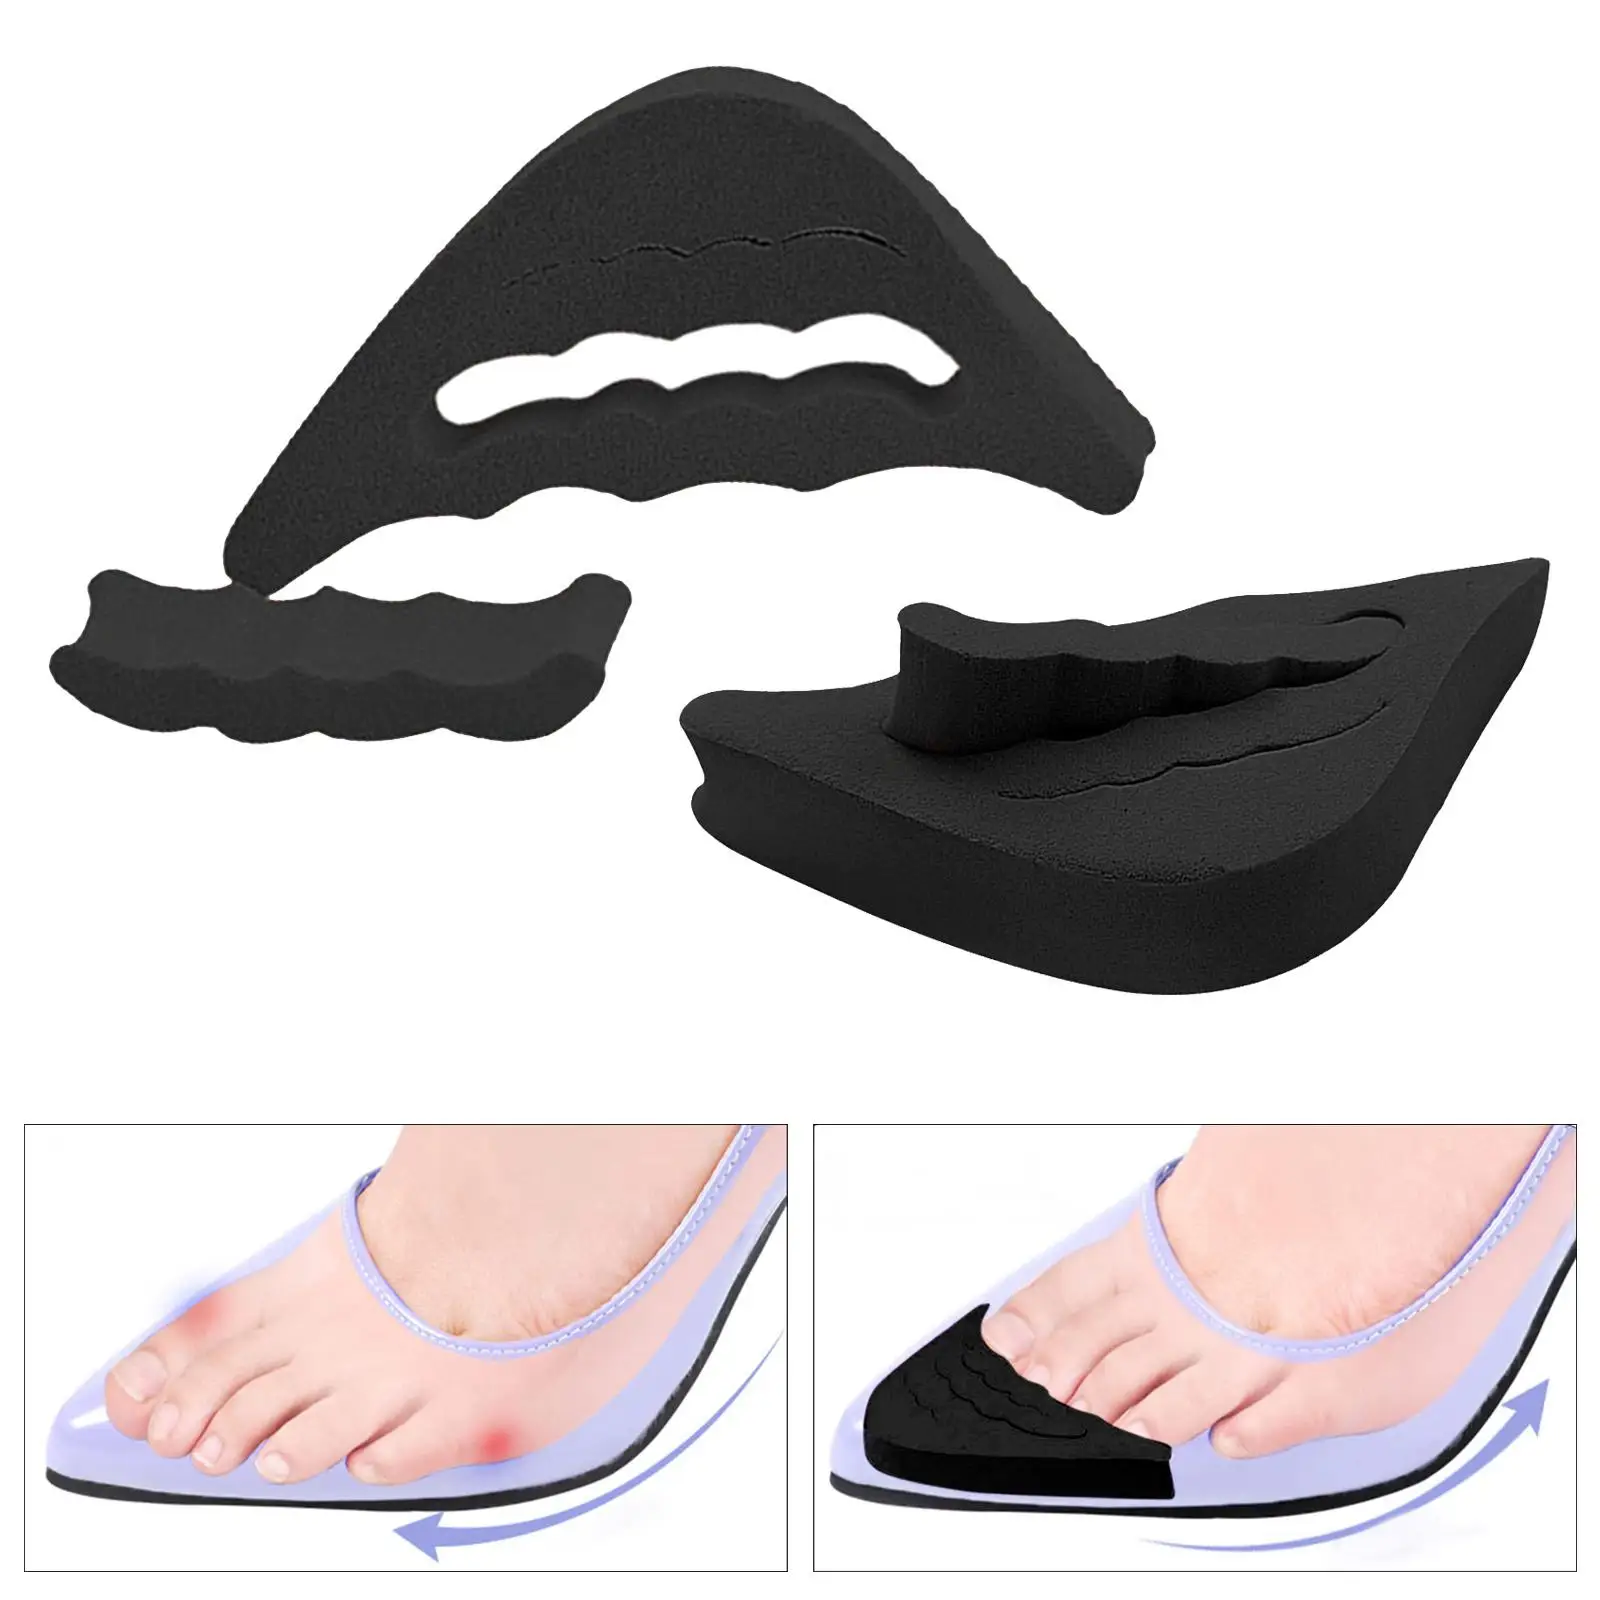 Toe Filler Inserts Pad Toes Forefoot Pads Foot Cushion Pads Nonslip Reusable Insoles Toe Plug for Running Shopping Outdoor